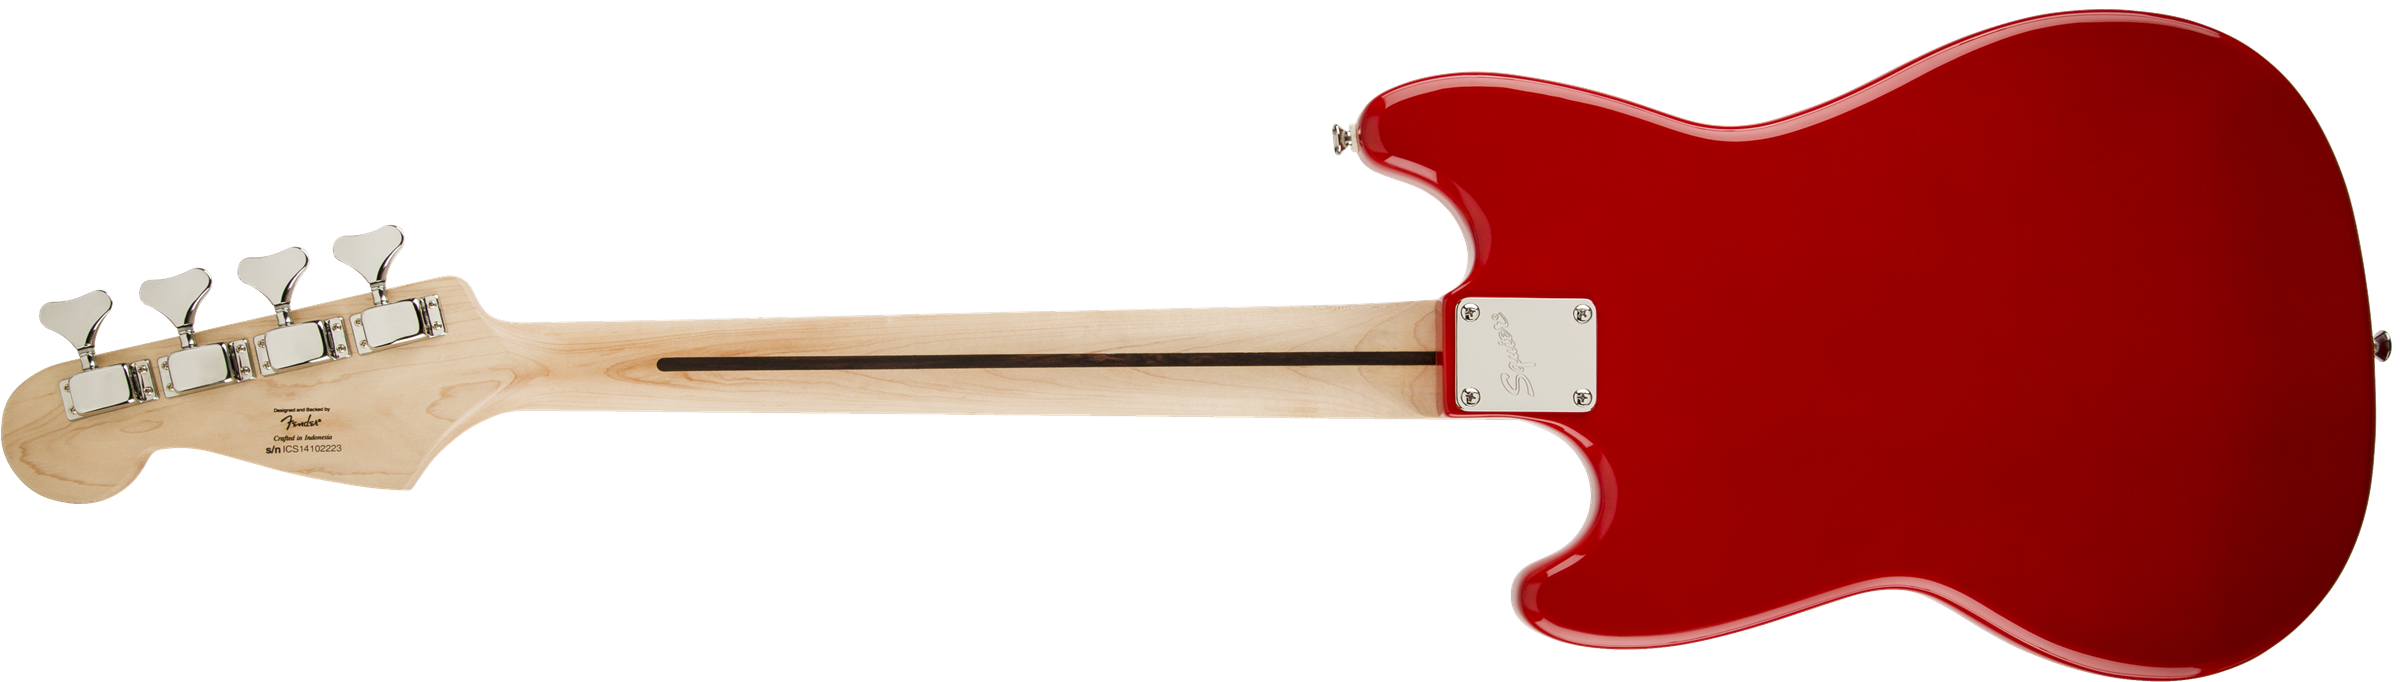 Squier Bronco Bass Mn - Torino Red - Electric bass for kids - Variation 1